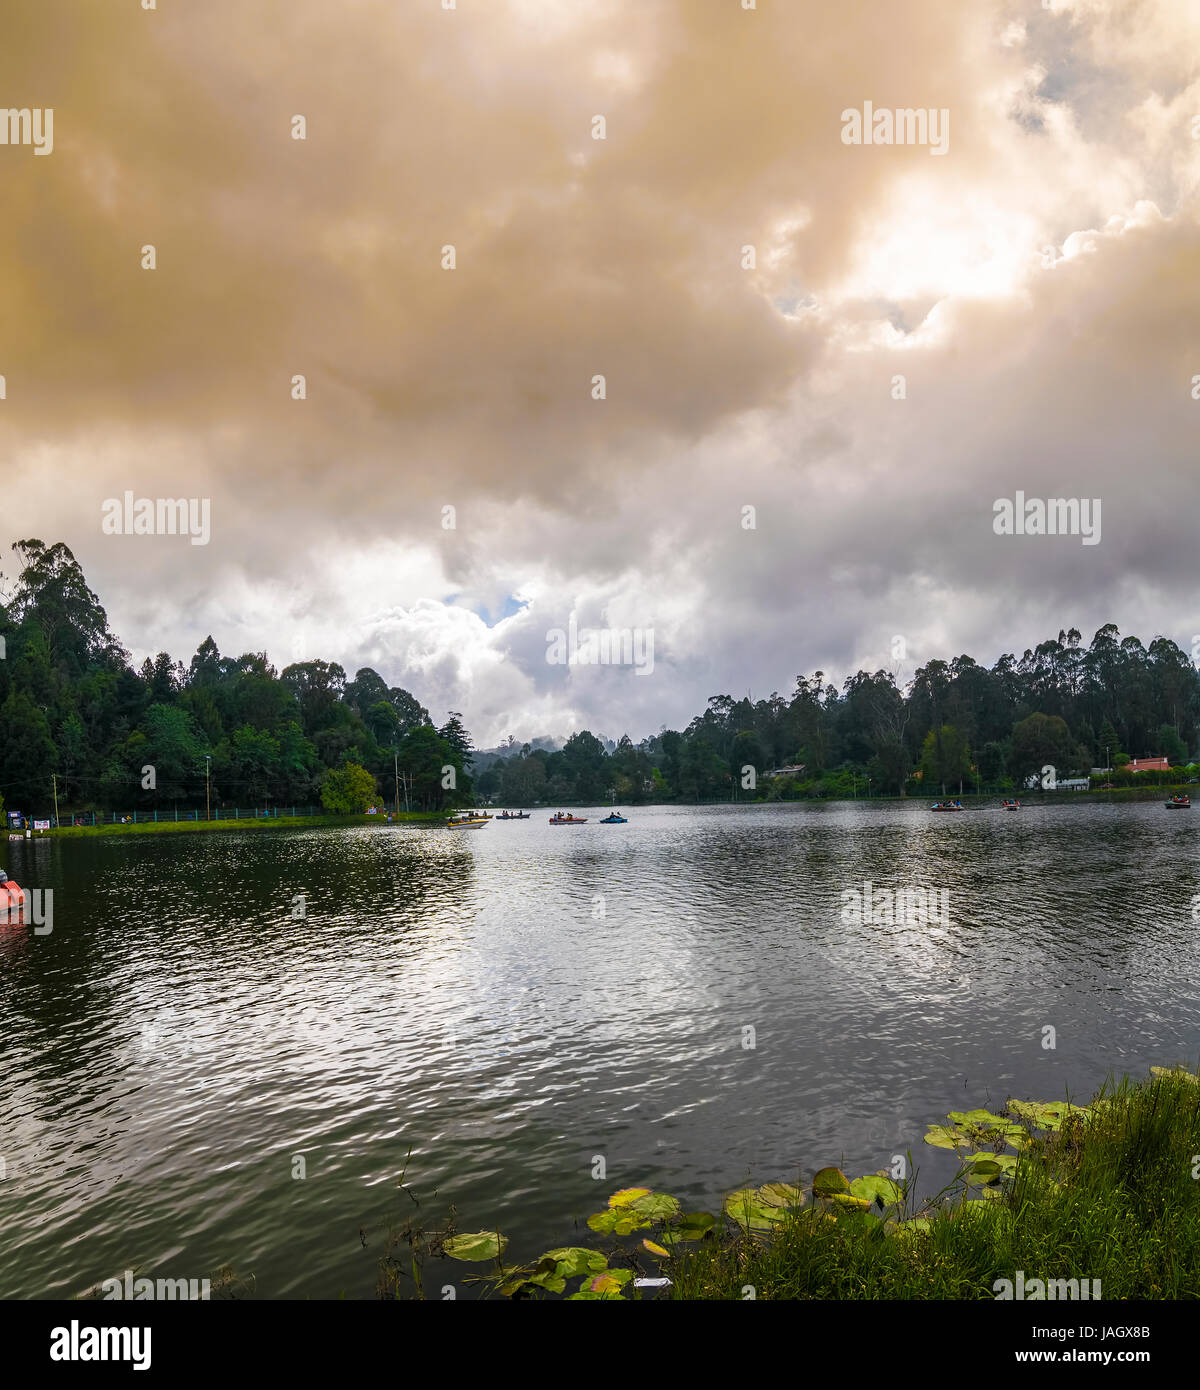 The star shaped Kodaikanal Lake, also known as Kodai Lake is located in the Kodaikanal city in Dindigul district in Tamil Nadu, India. The lake is sur Stock Photo